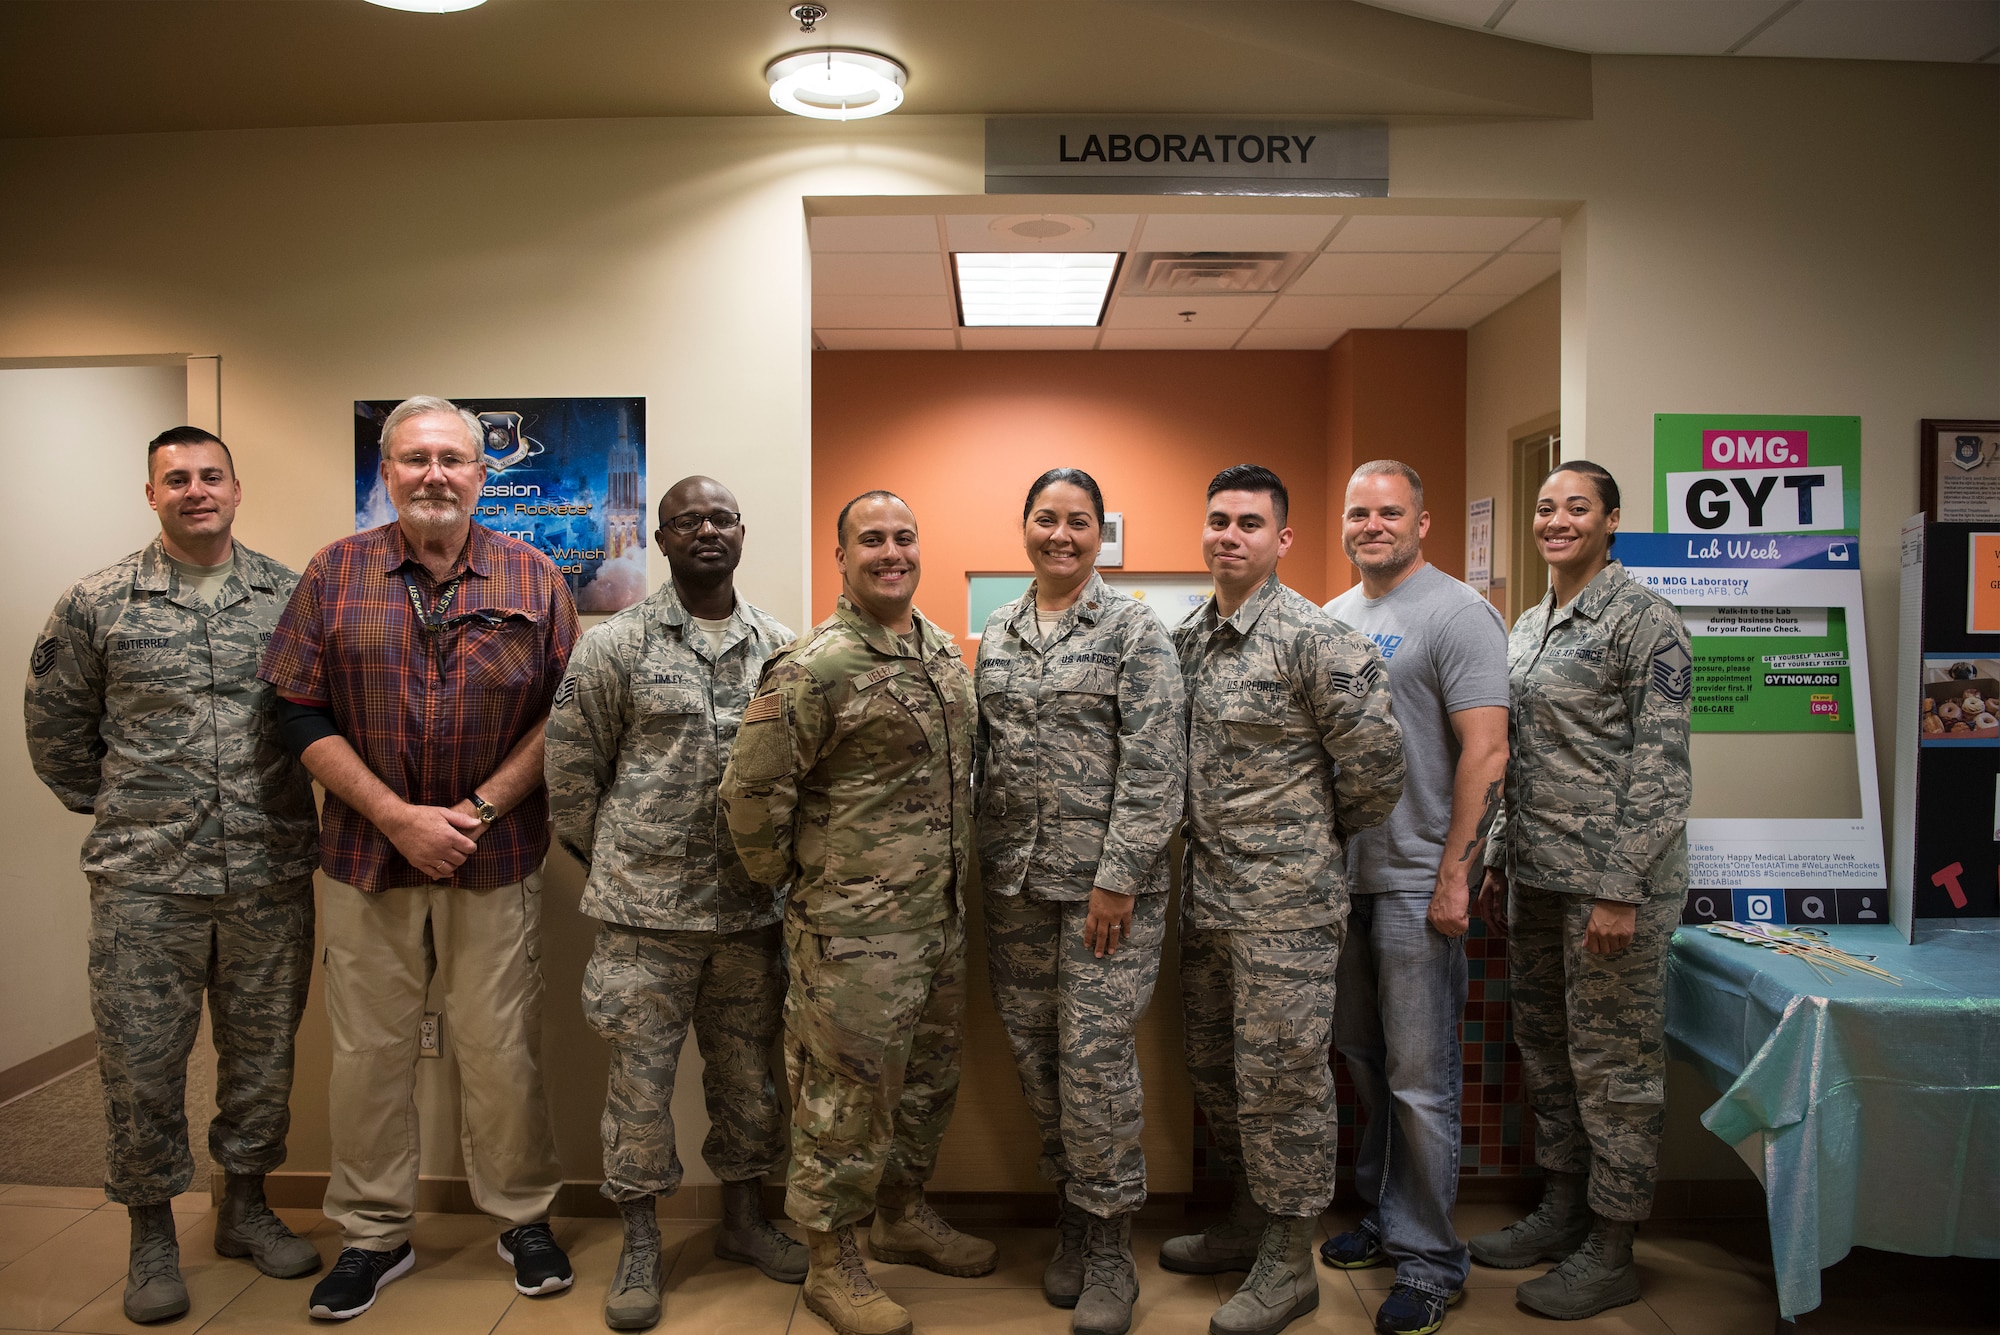 Members assigned to the 30th Medical Support Squadron Laboratory pose for a photo in celebration of Medical Laboratory Professionals Week, also known as Labe Week, April 24, 2019, Vandenberg Air Force Base, Calif. Lab Week is an annual observance to spread awareness and show appreciation to medical laboratory professionals and pathologists for the work they do to assist patients. (U.S. Air Force photo by Airman 1st Class Hanah Abercrombie)